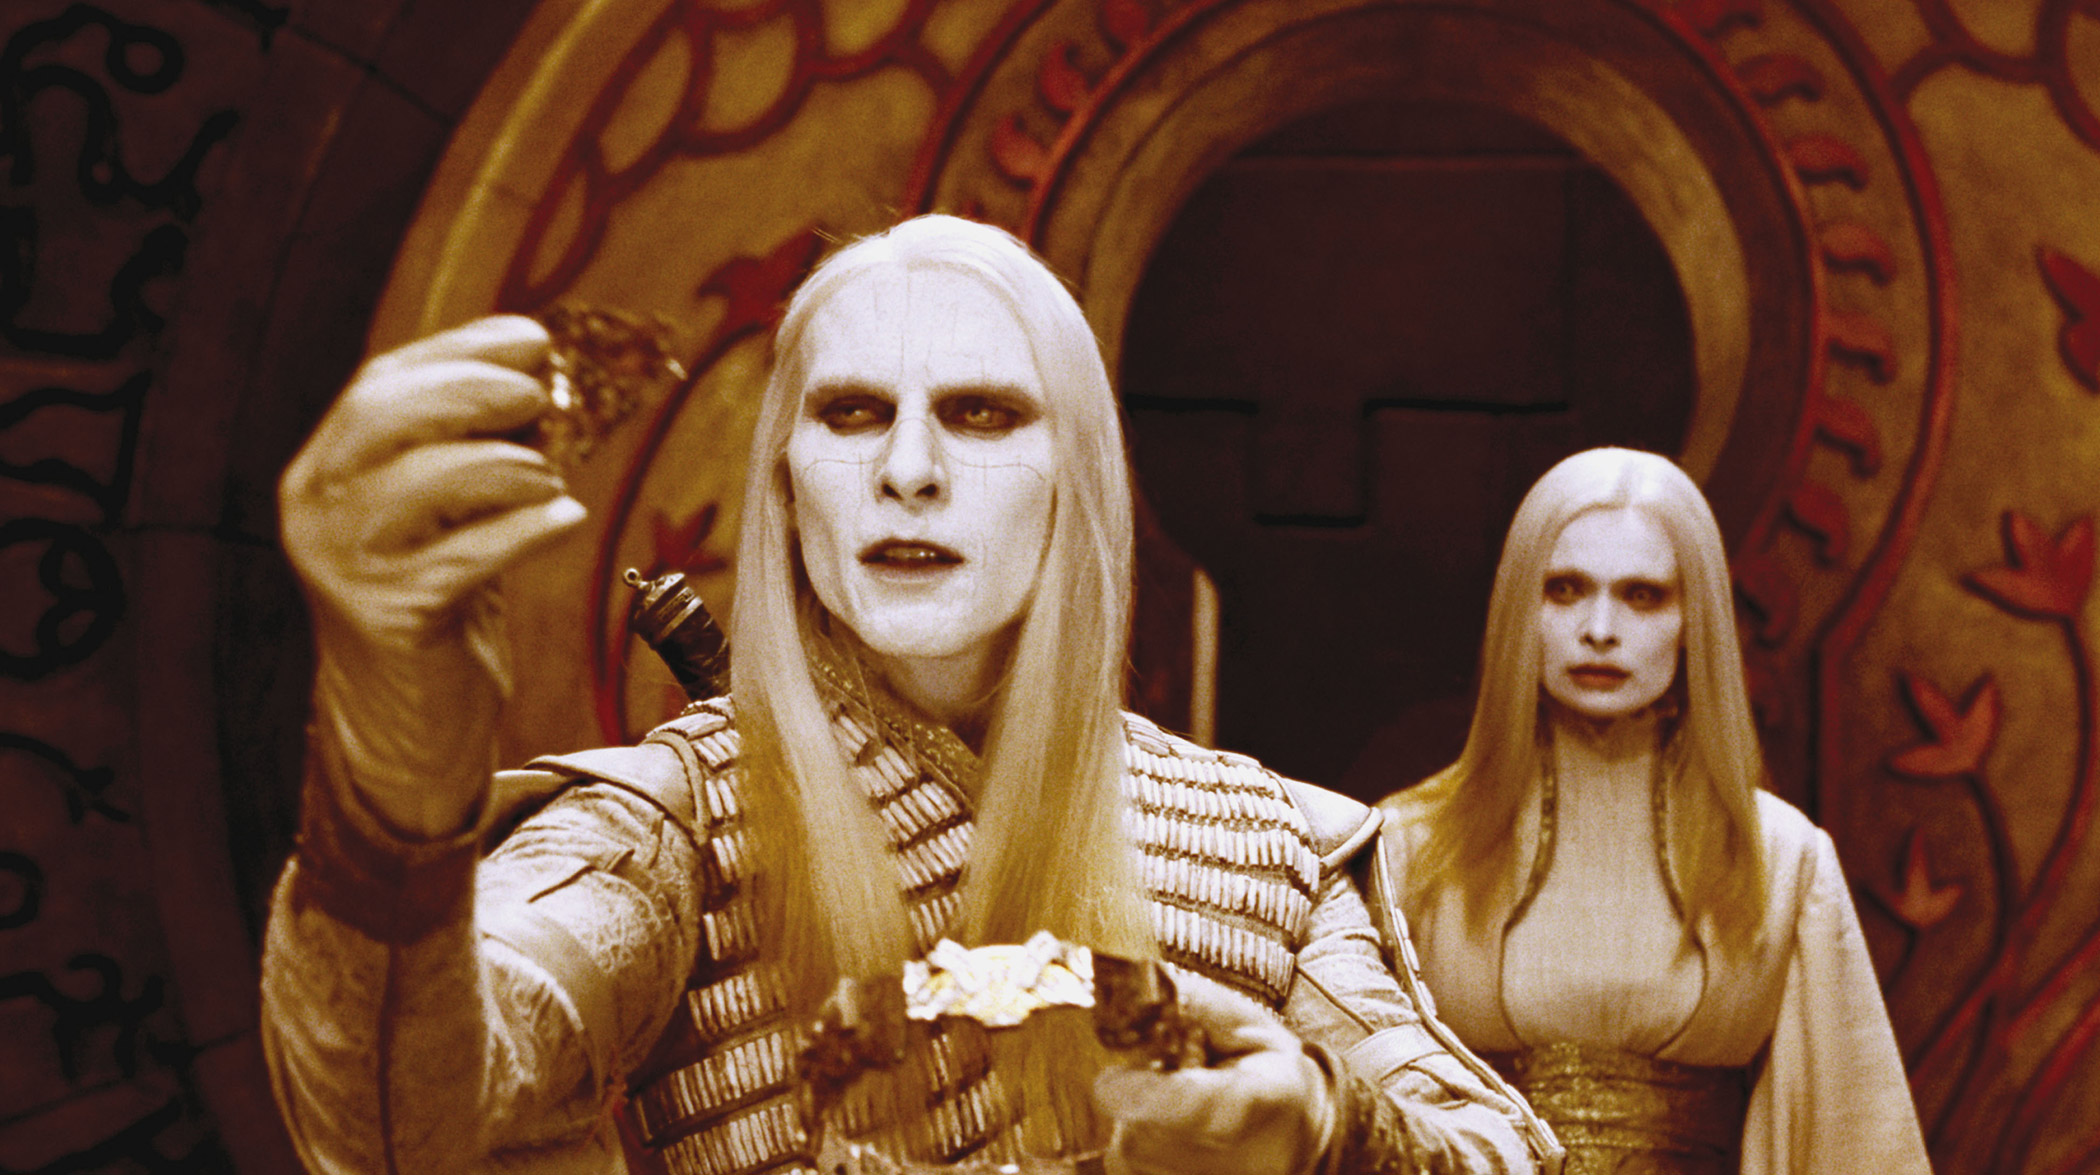 Luke Goss and Anna Walton as Prince and Princess Nuada in Hellboy 2: The Golden Army, 2008.